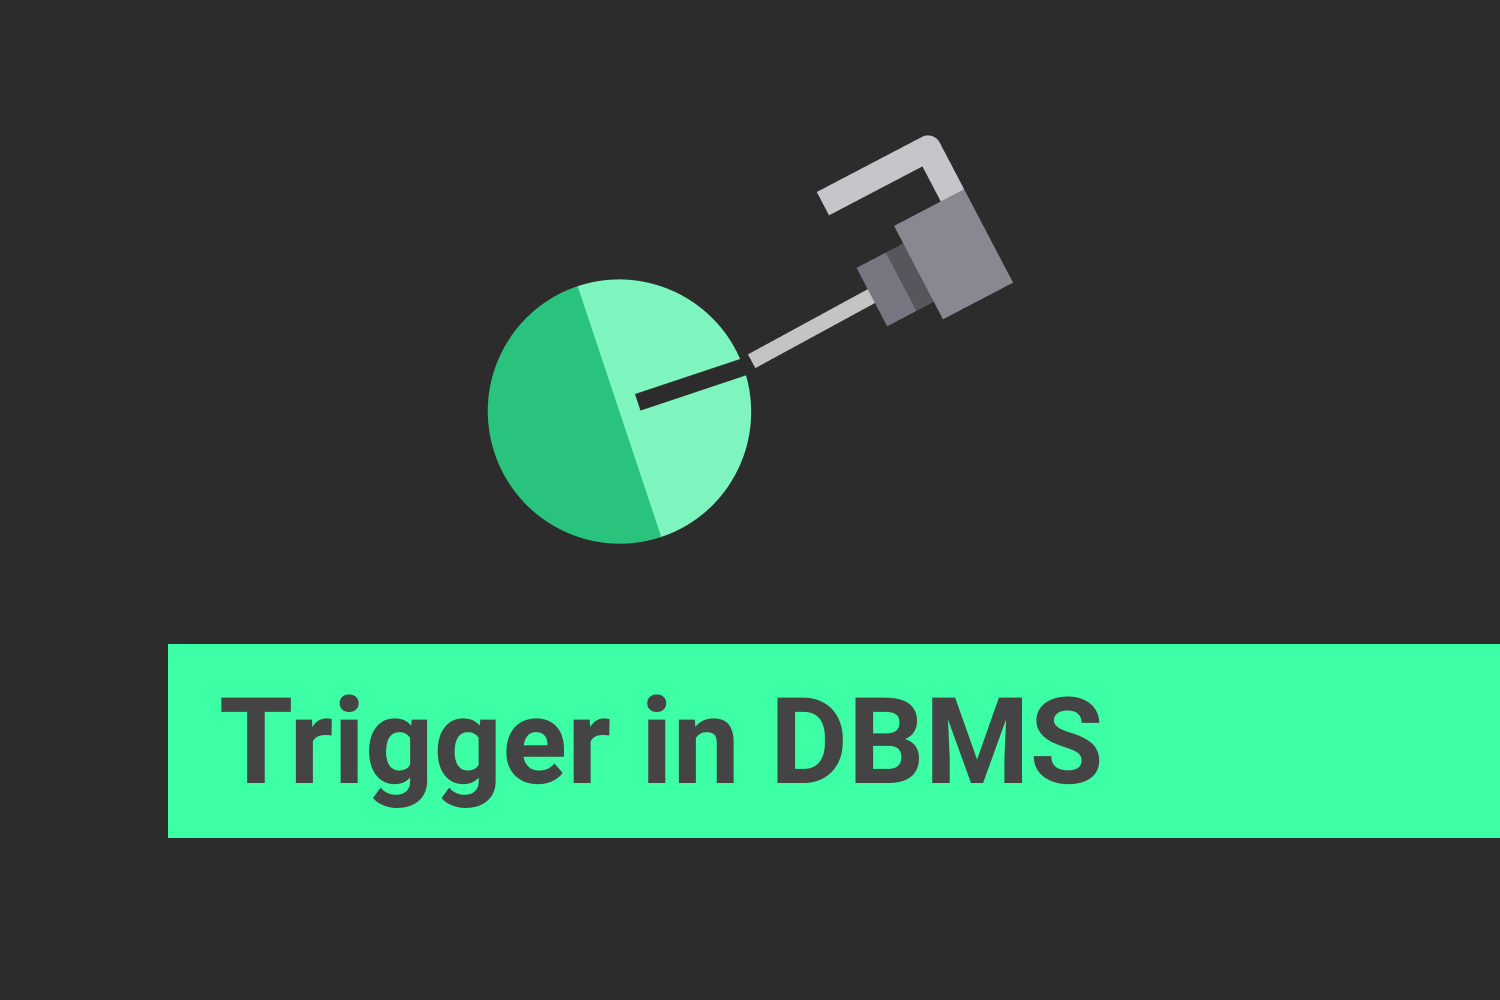 What is a Trigger in DBMS?